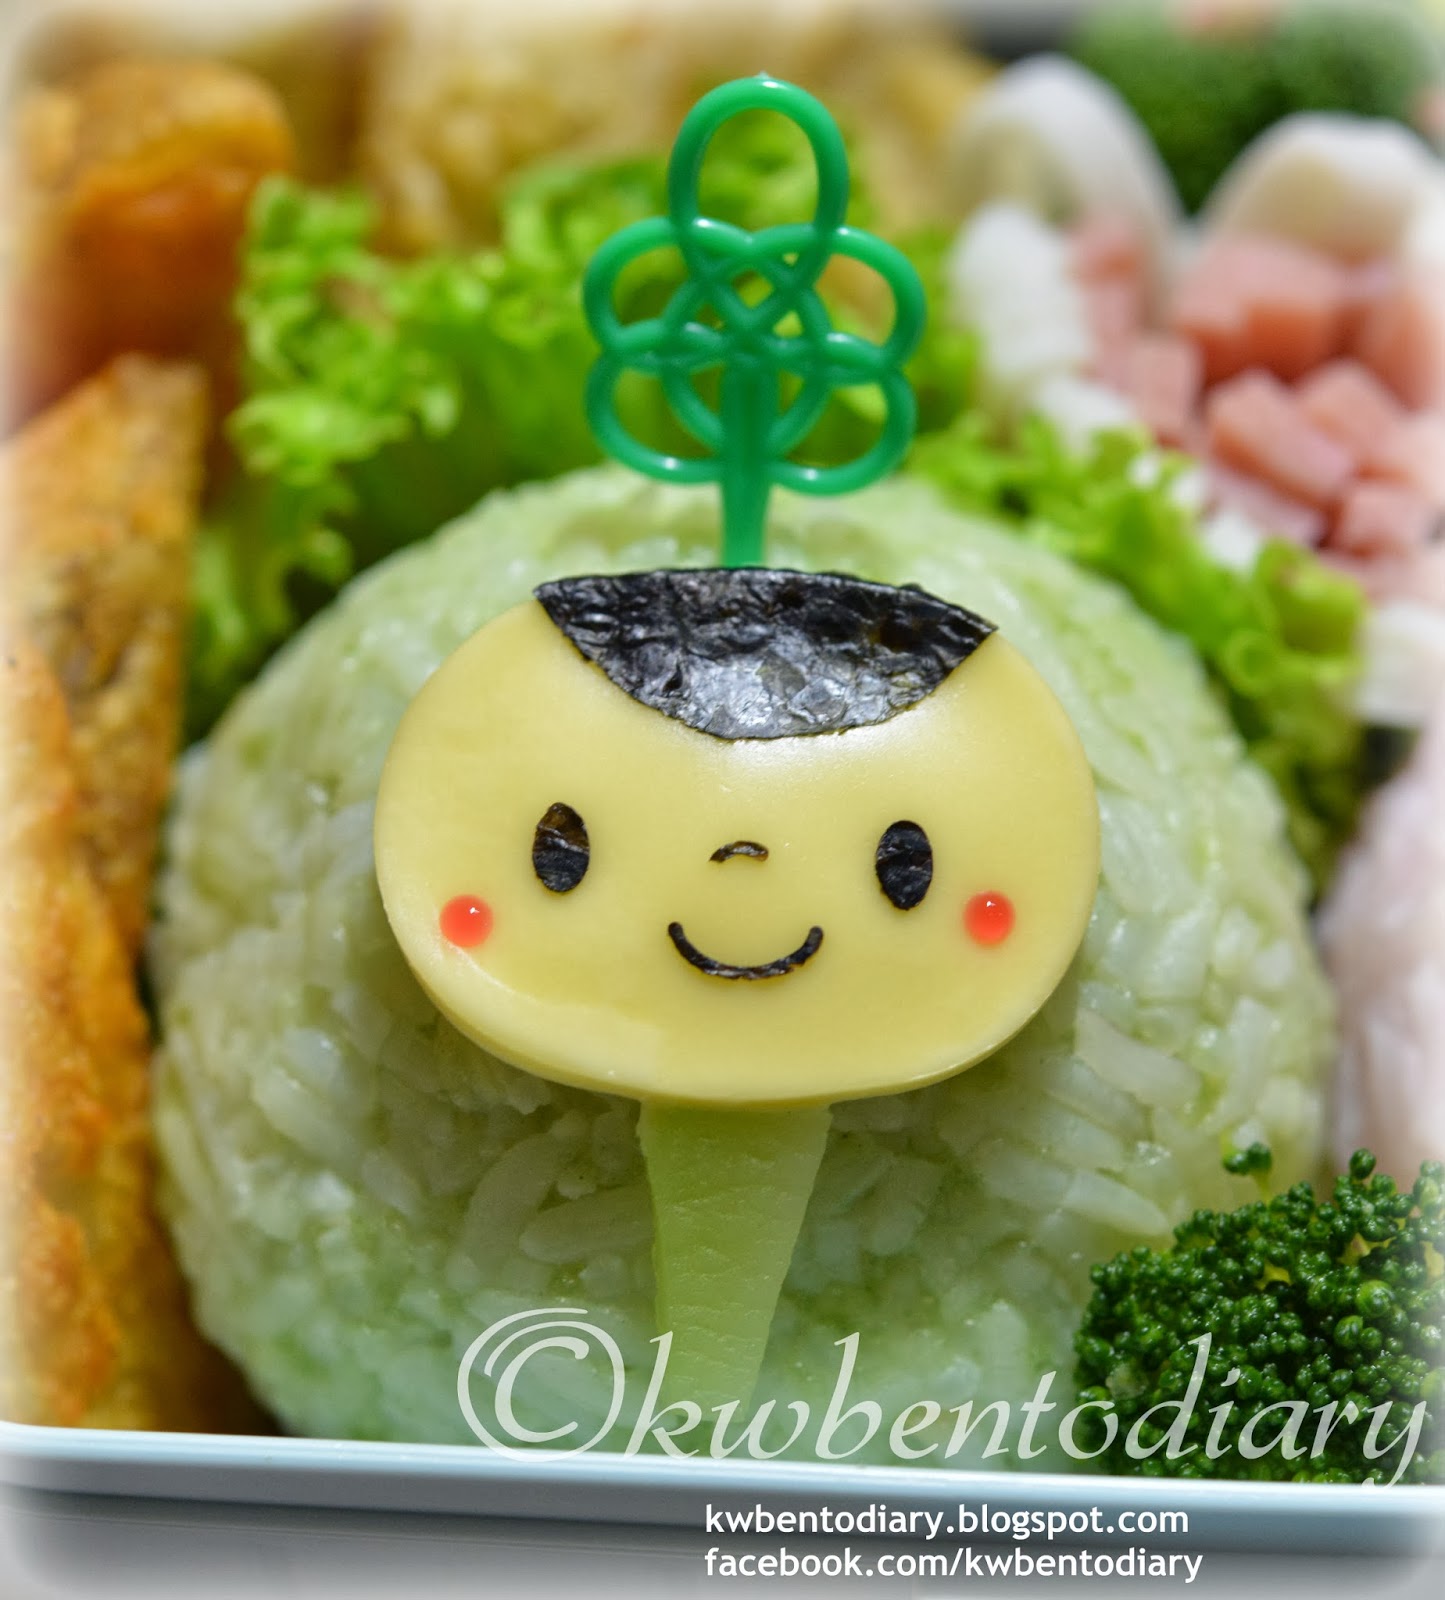 Bento School Lunches : Bento Lunch: Smiley Pancakes and MonBento New  Accessories Review